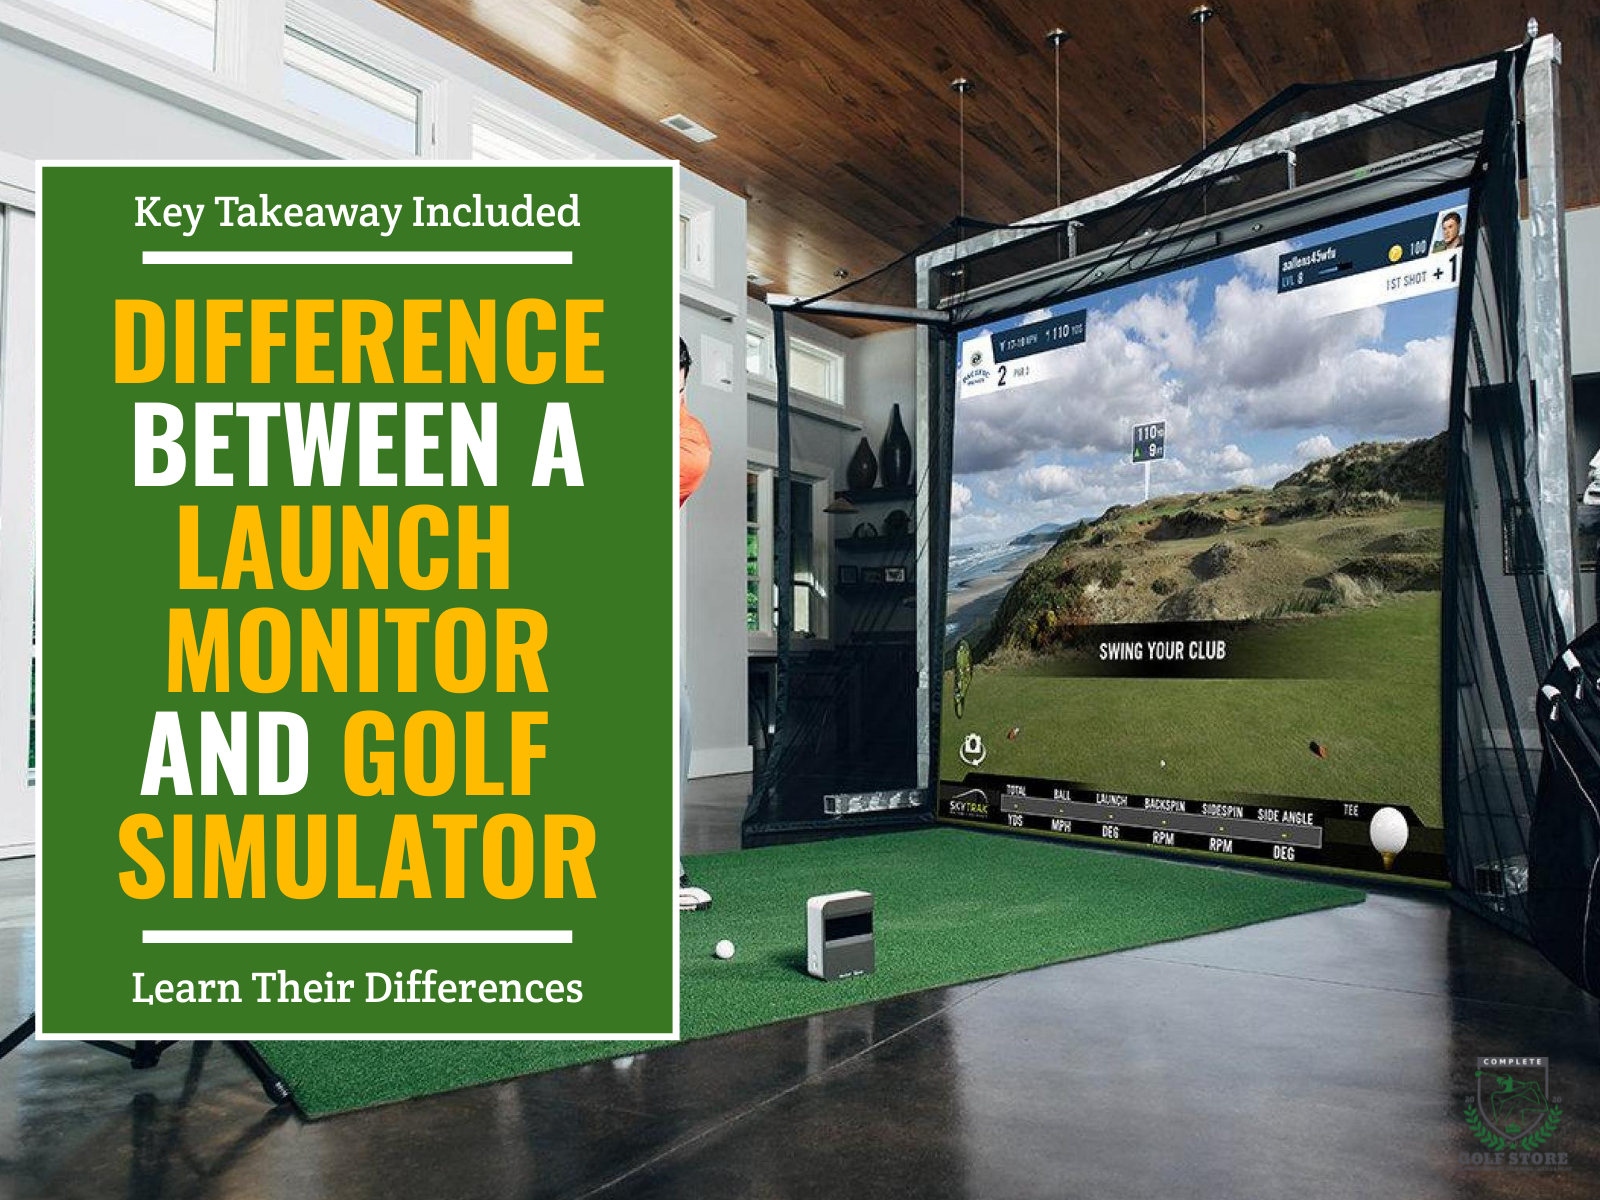 Complete golf simulator setup with launch monitor beside a lot of golf balls on the hitting mat. Green textbox on the left contains the text 